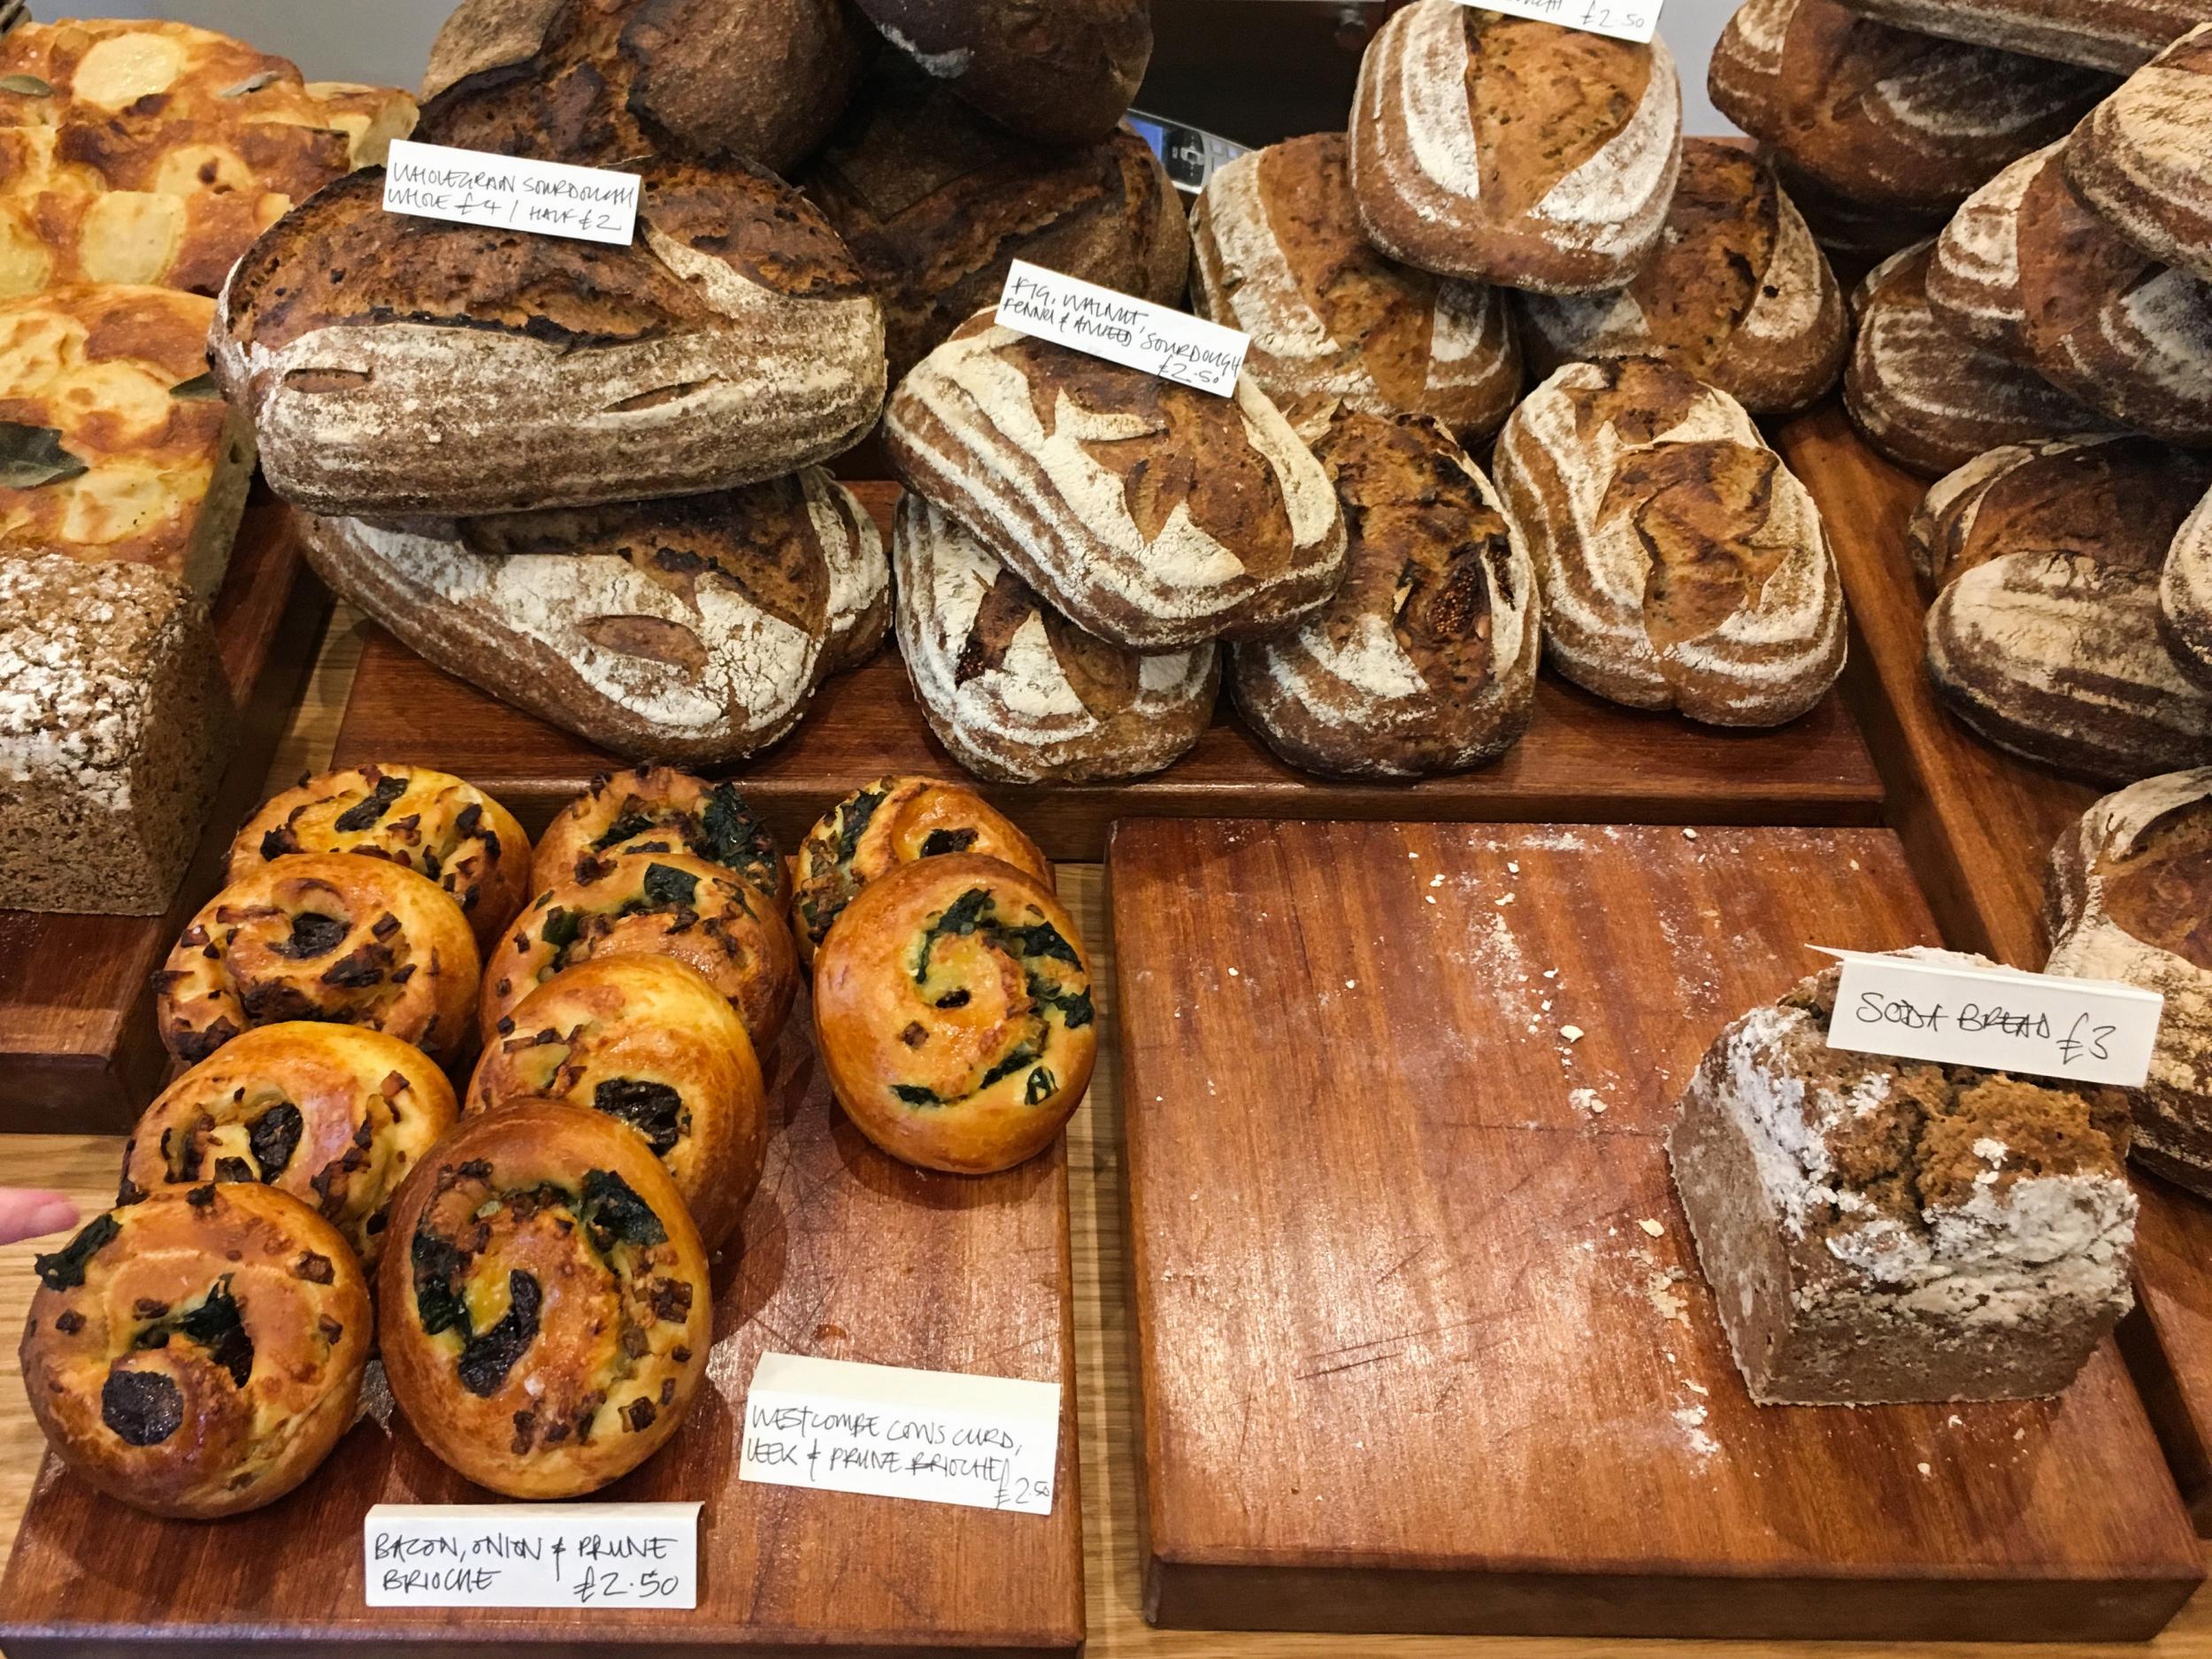 Be sure to pay a visit to the hotel’s own on-site bakery, for artisan breads, patisserie, pies and more